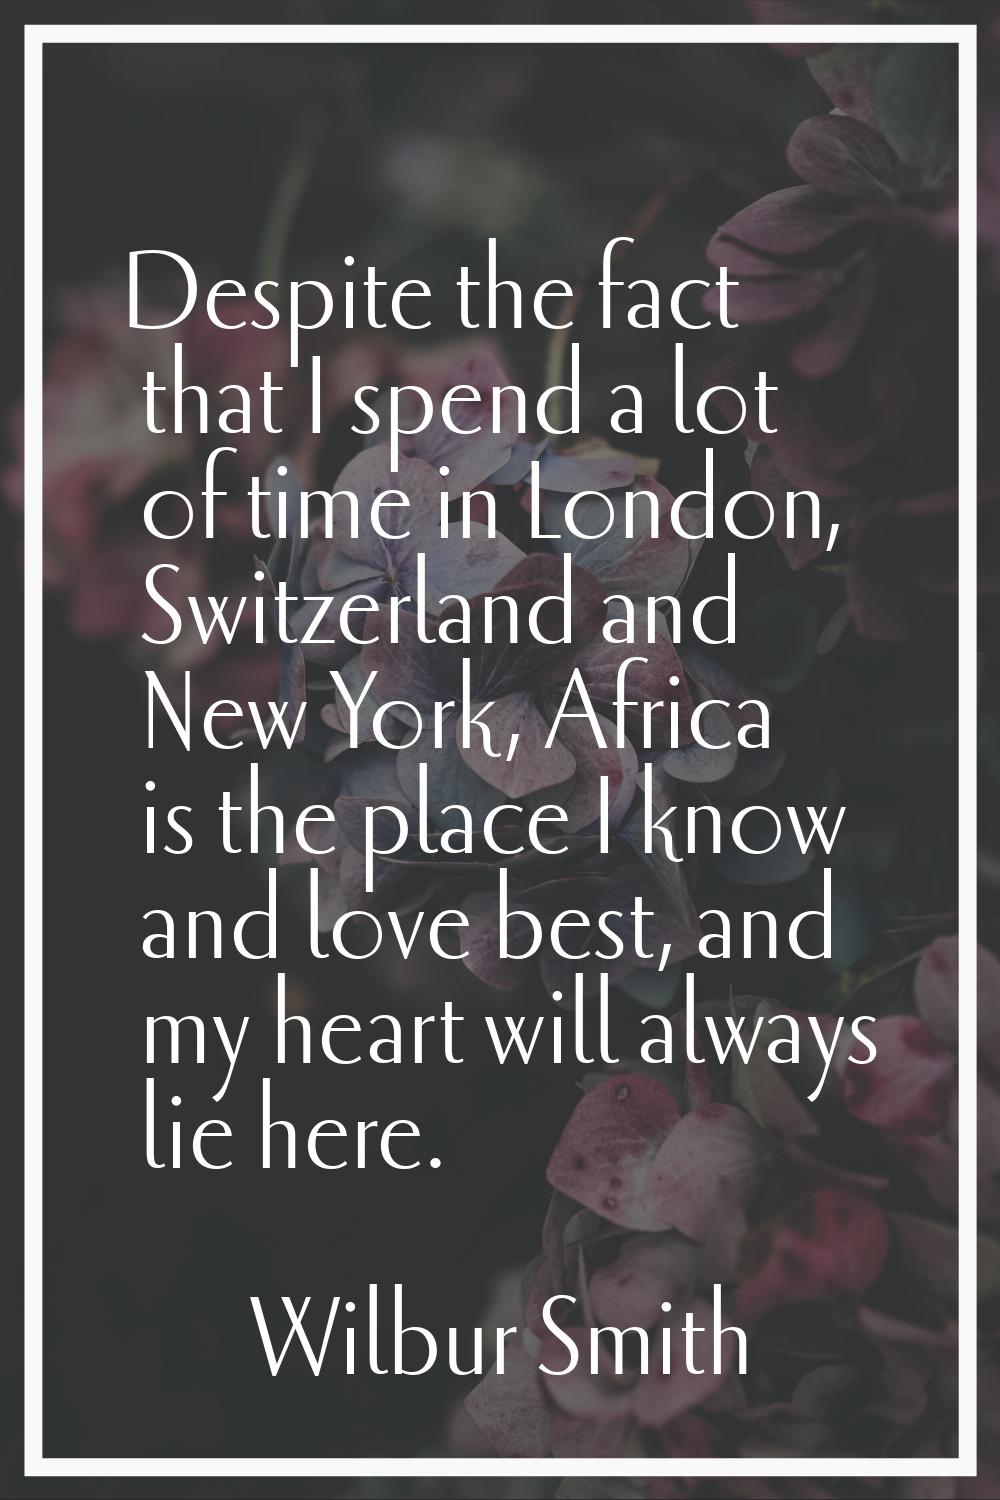 Despite the fact that I spend a lot of time in London, Switzerland and New York, Africa is the plac